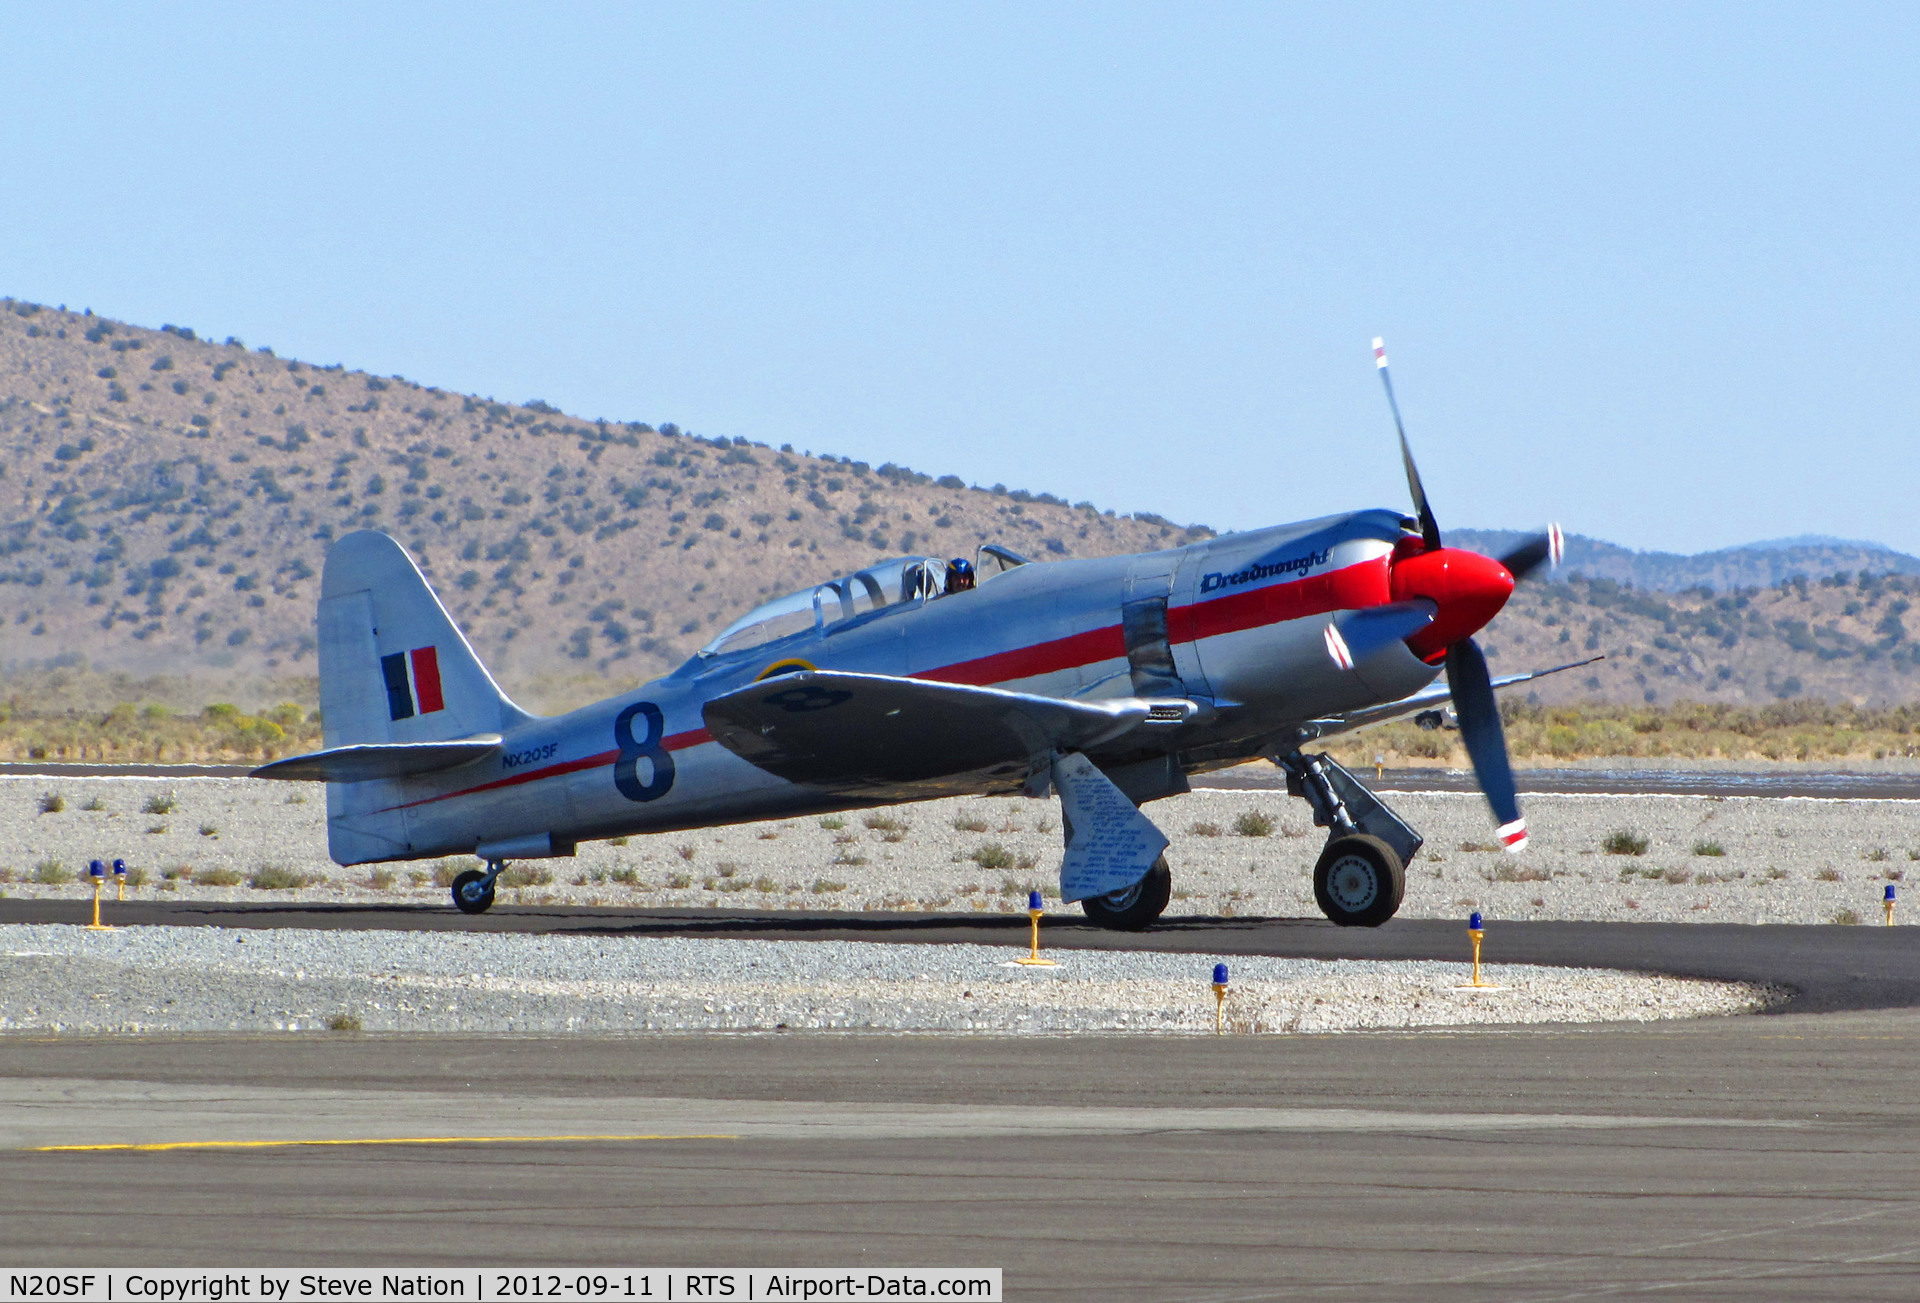 N20SF, 1956 Hawker Sea Fury T.20 C/N ES.9505, Dennis Sanders in Sea Fury T Mk 20 Race #8 DREADNOUGHT after morning qualifying run @ on September 11, 2012 at Stead Airport during Reno Air Races